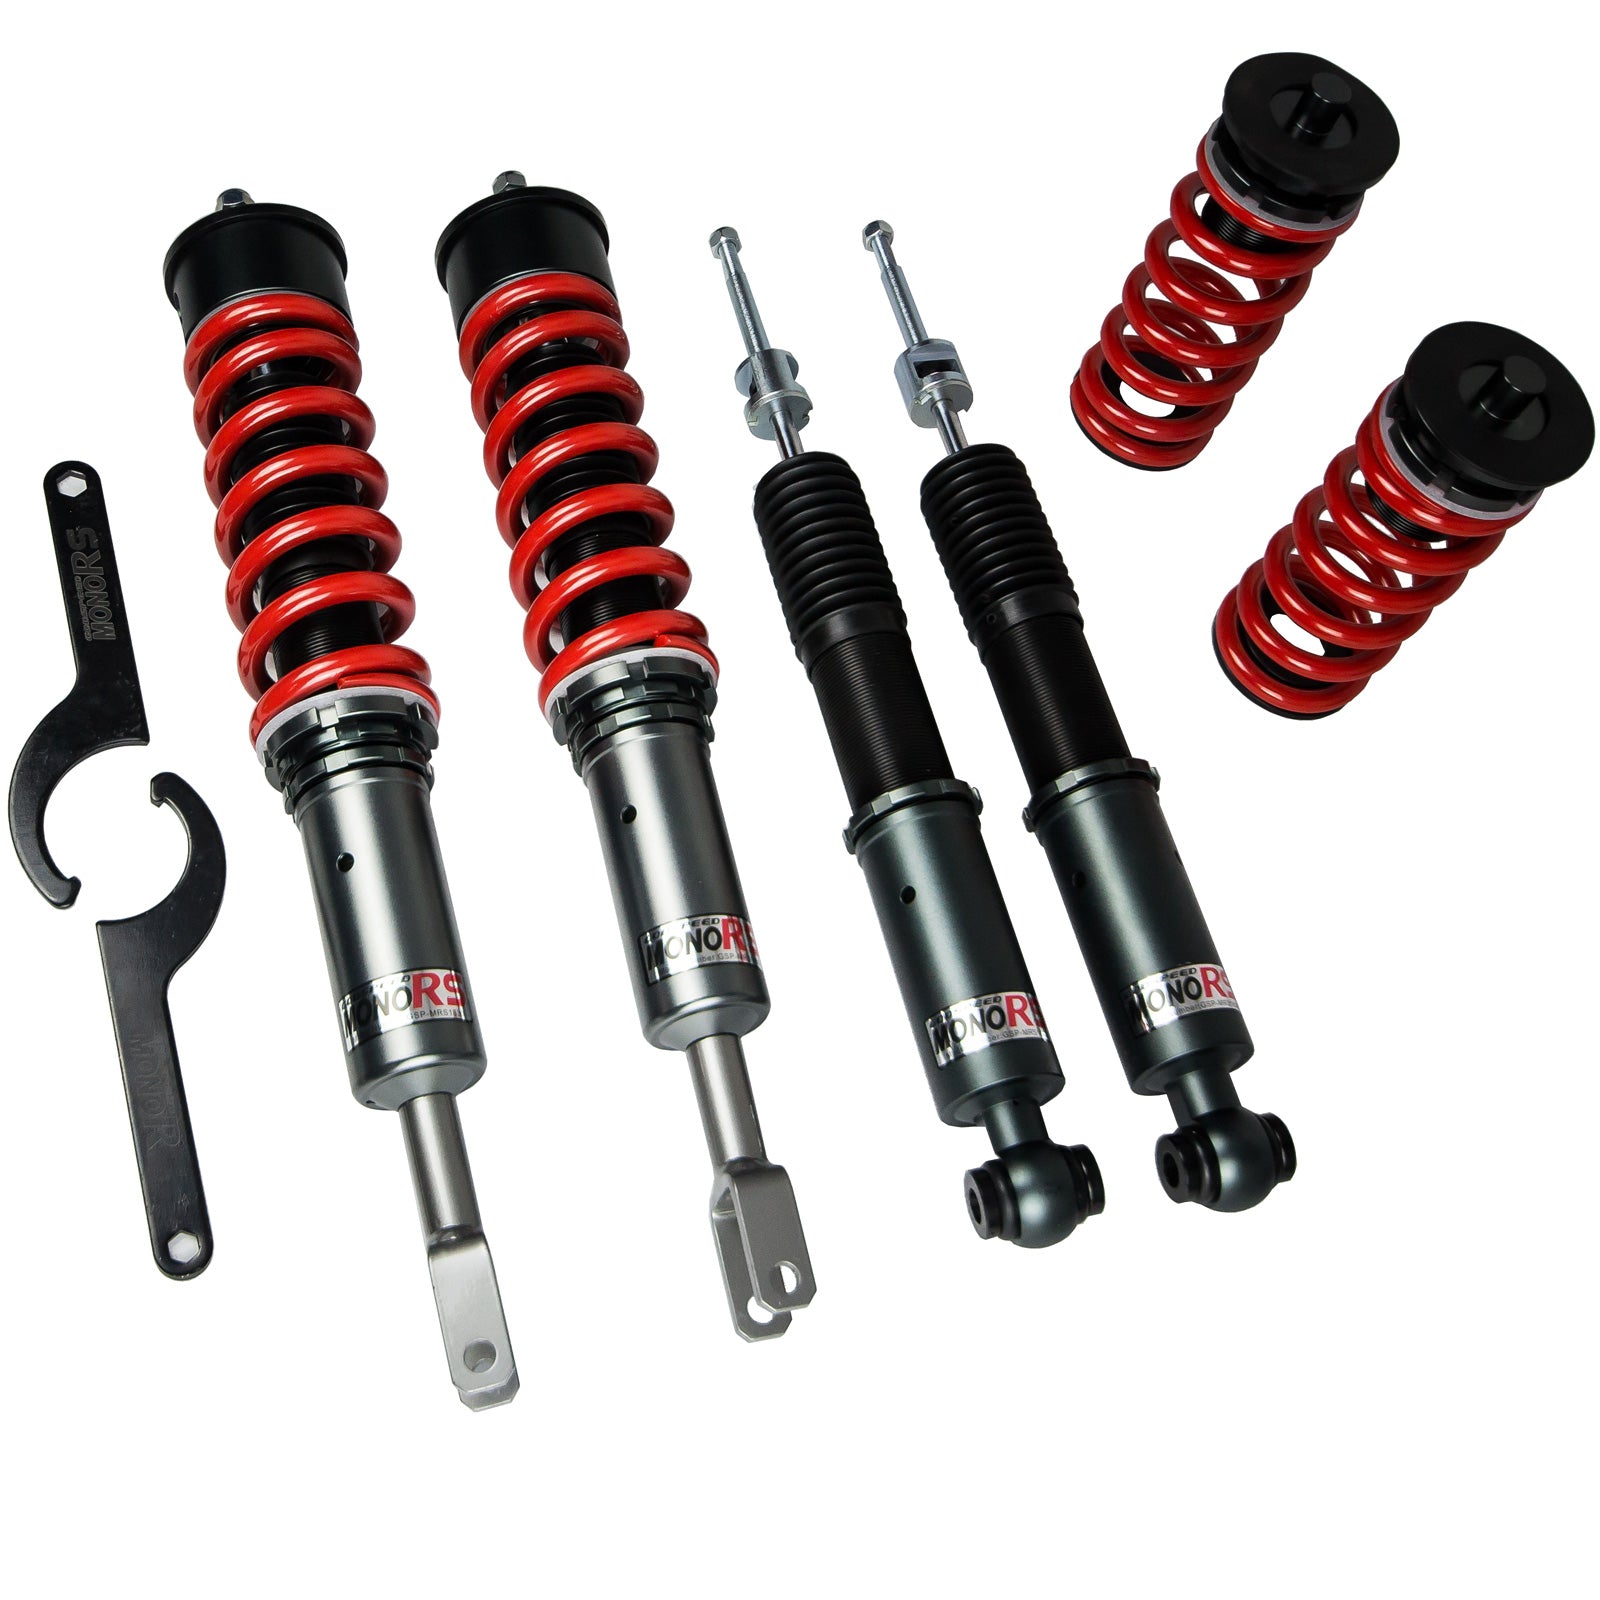 Godspeed MRS1830-A MonoRS Coilover Lowering Kit, 32 Damping Adjustment, Ride Height Adjustable